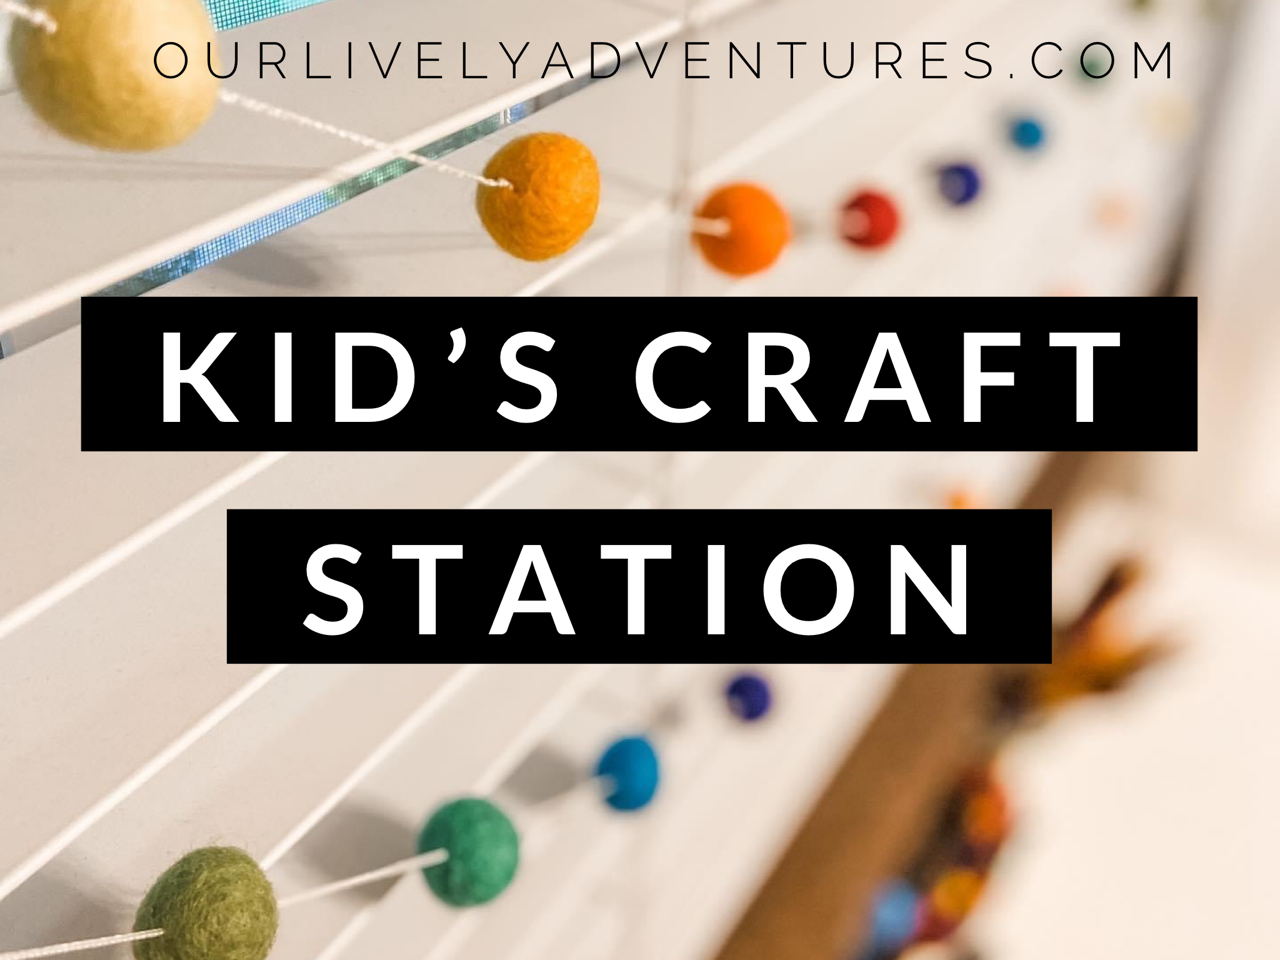 Kid’s Craft Station: A Beautiful Workspace That Sparks Creativity